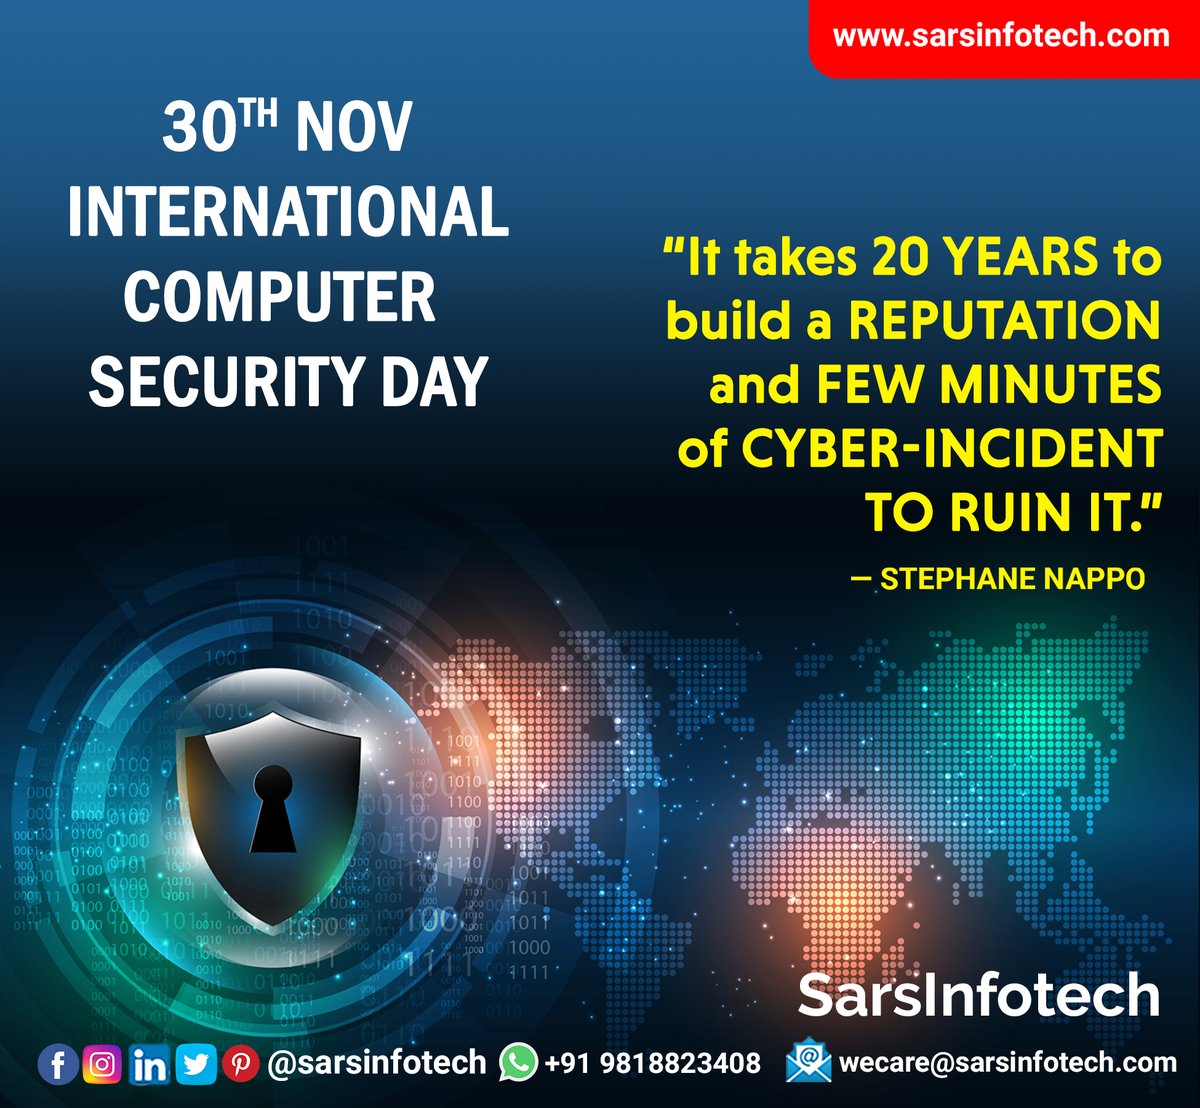 Nowadays, electronic #gadgets have become an integral part of our lives. Let us all understand & learn different ways to #secure crucial #database from hacking on the account of #InternationalComputerSecurityDay 

@rsprasad @intel @microsoft @acer @ASUS @Lenovo @dell @HPIndia